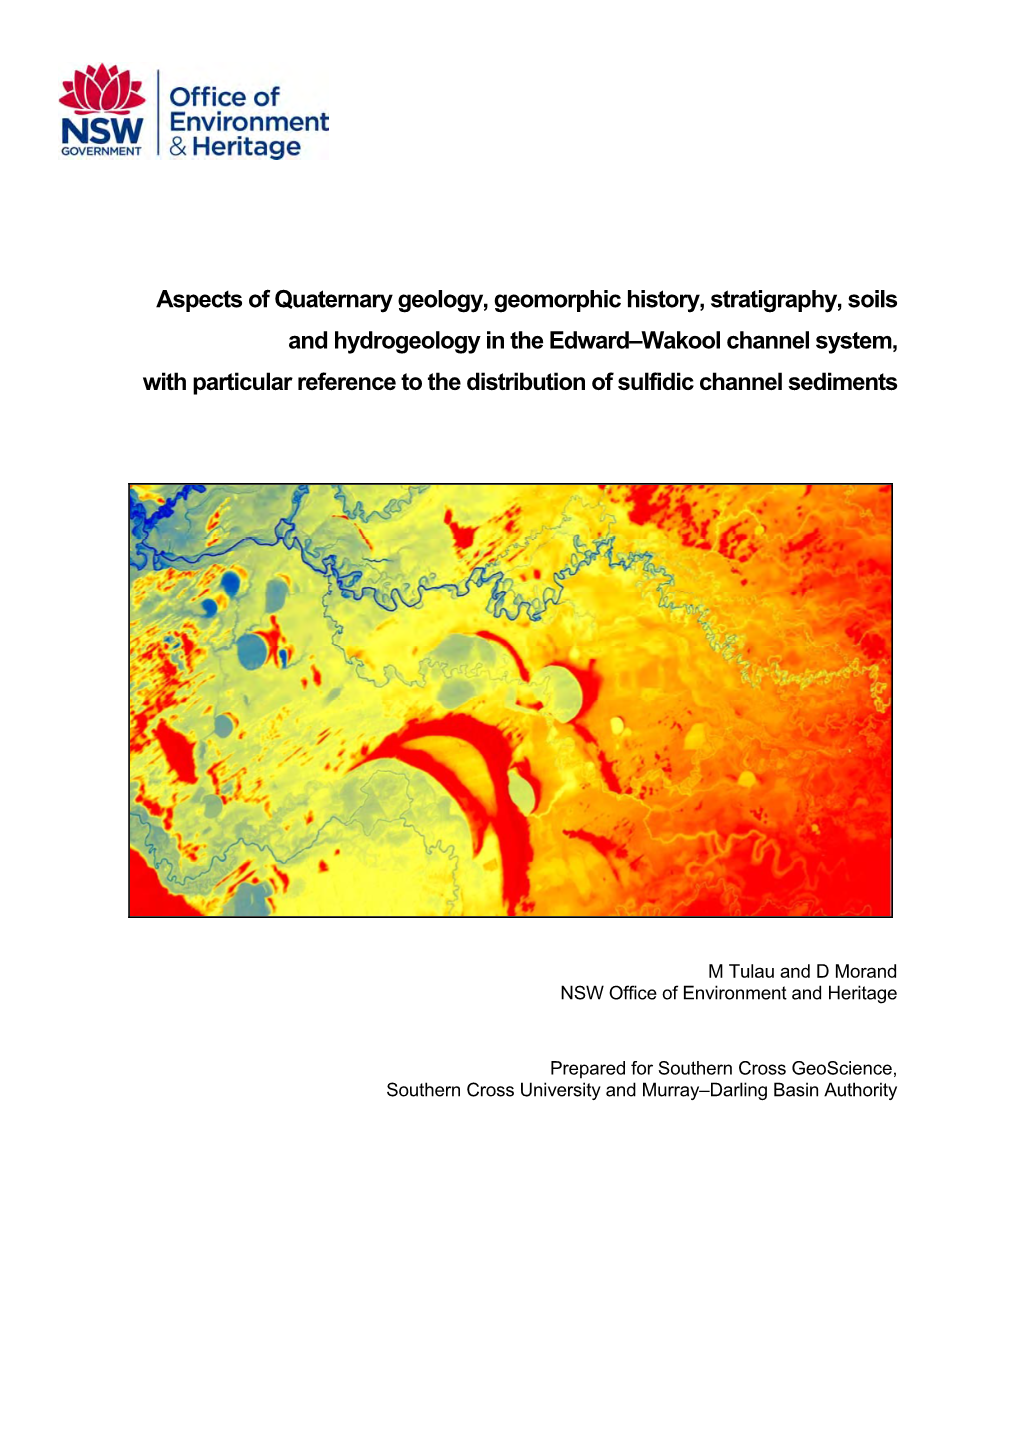 Aspects of Quaternary Geology, Geomorphic History, Stratigraphy, Soils and Hydrogeology in the Edward-Wakool Channel System